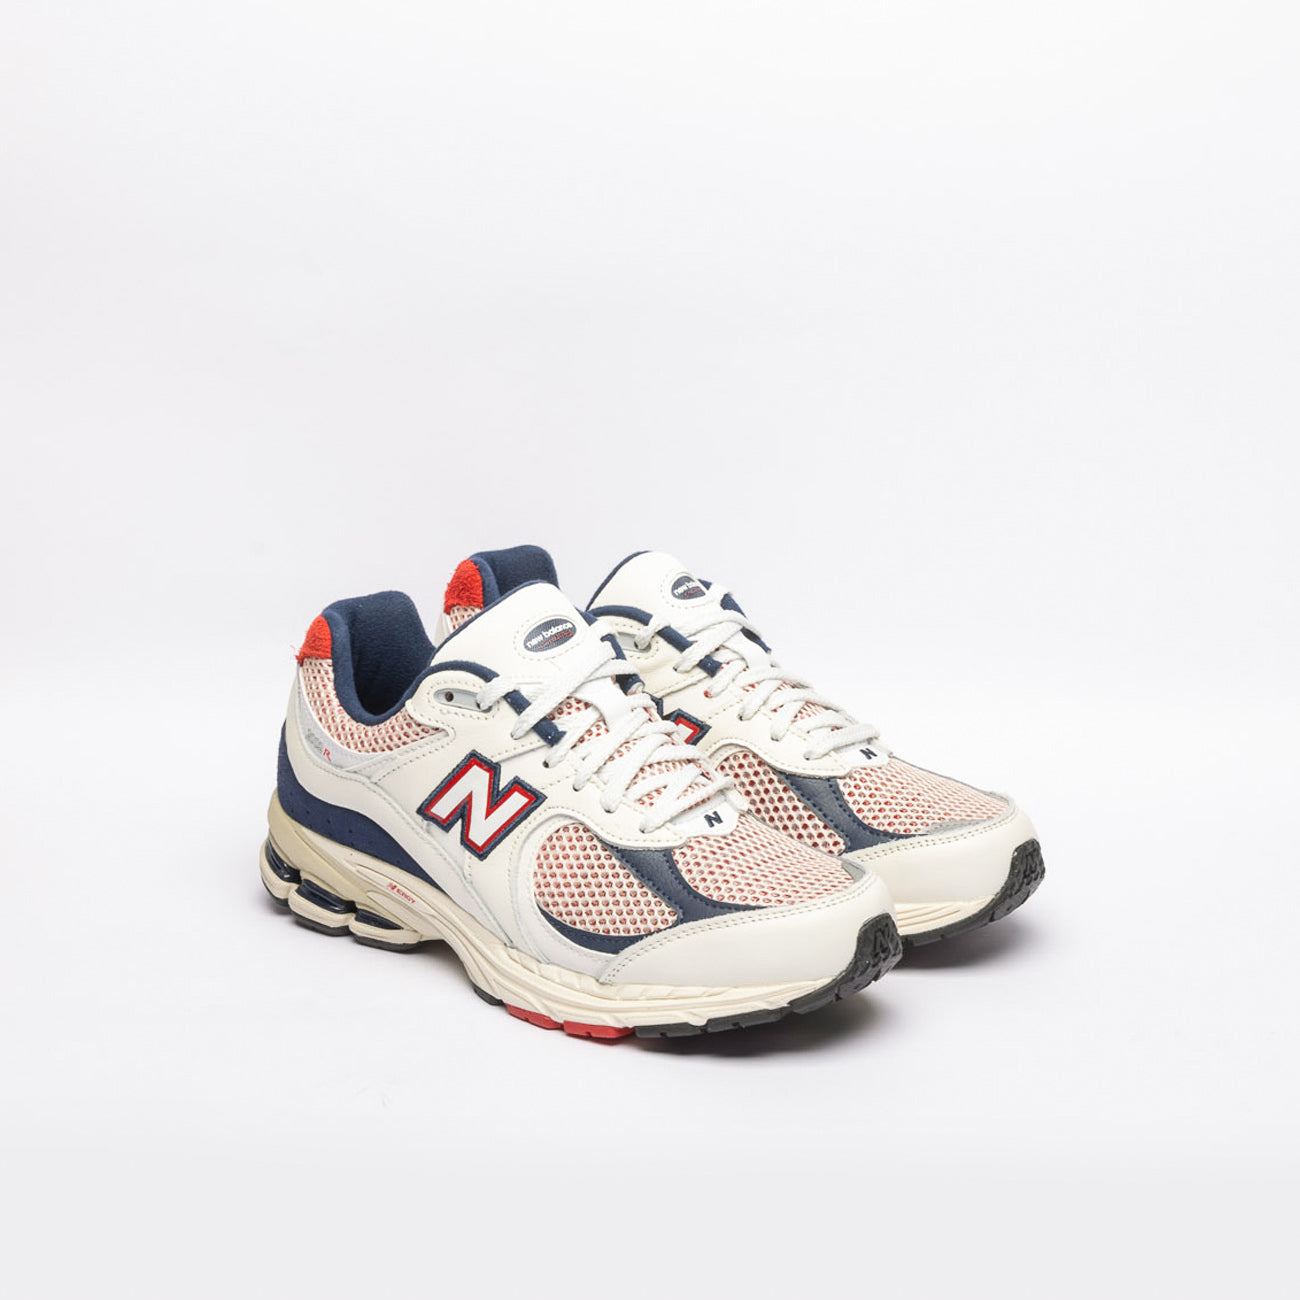 New Balance 2002 white leather running sneaker with blue and red details